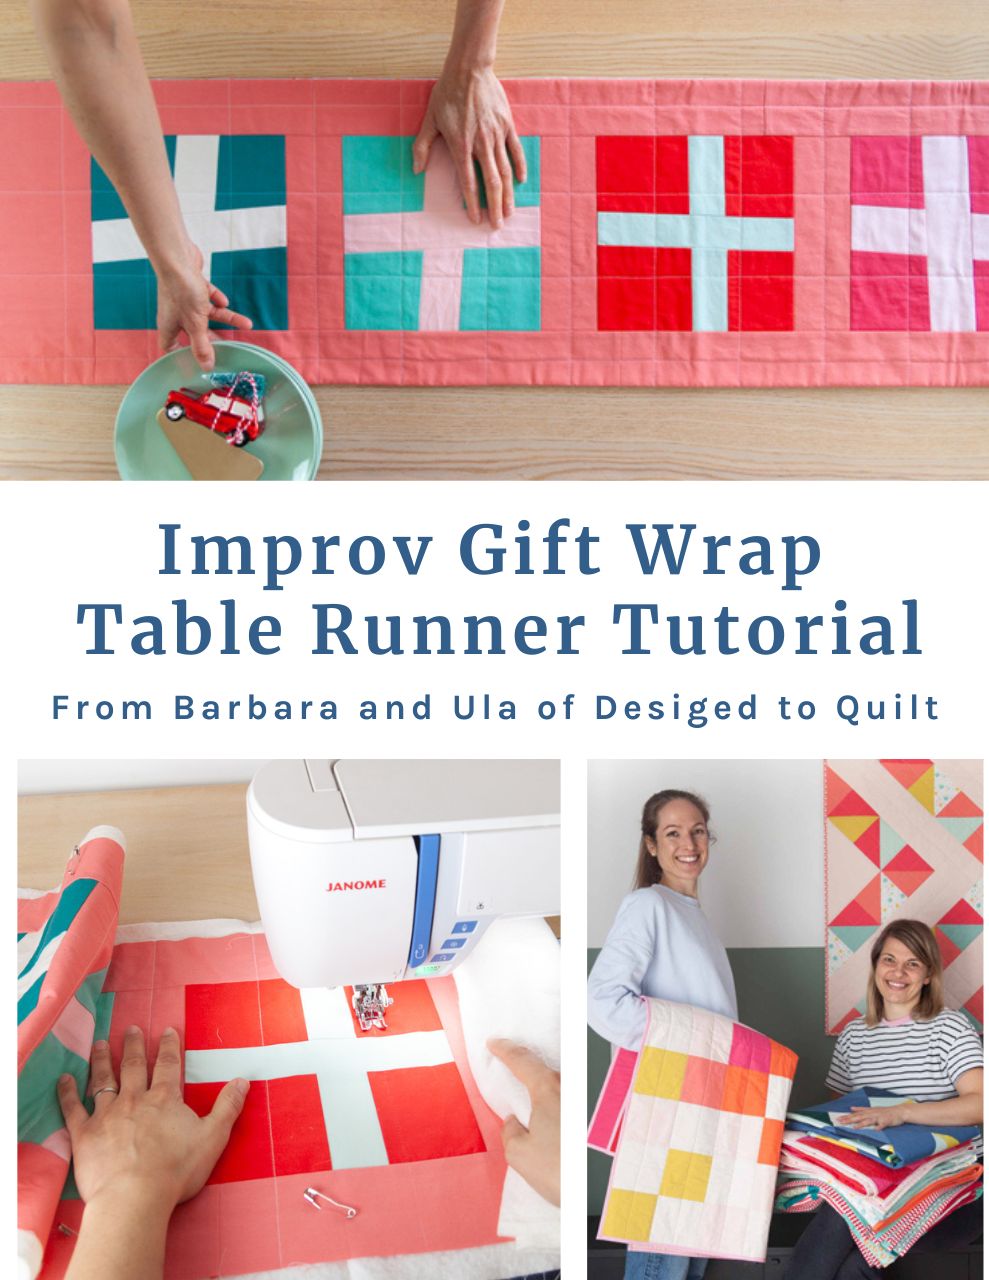 Free Quilt pattern for Improv-piecing gift wrap quilt block table runner from Ula and Barbara at Designed to Quilt.